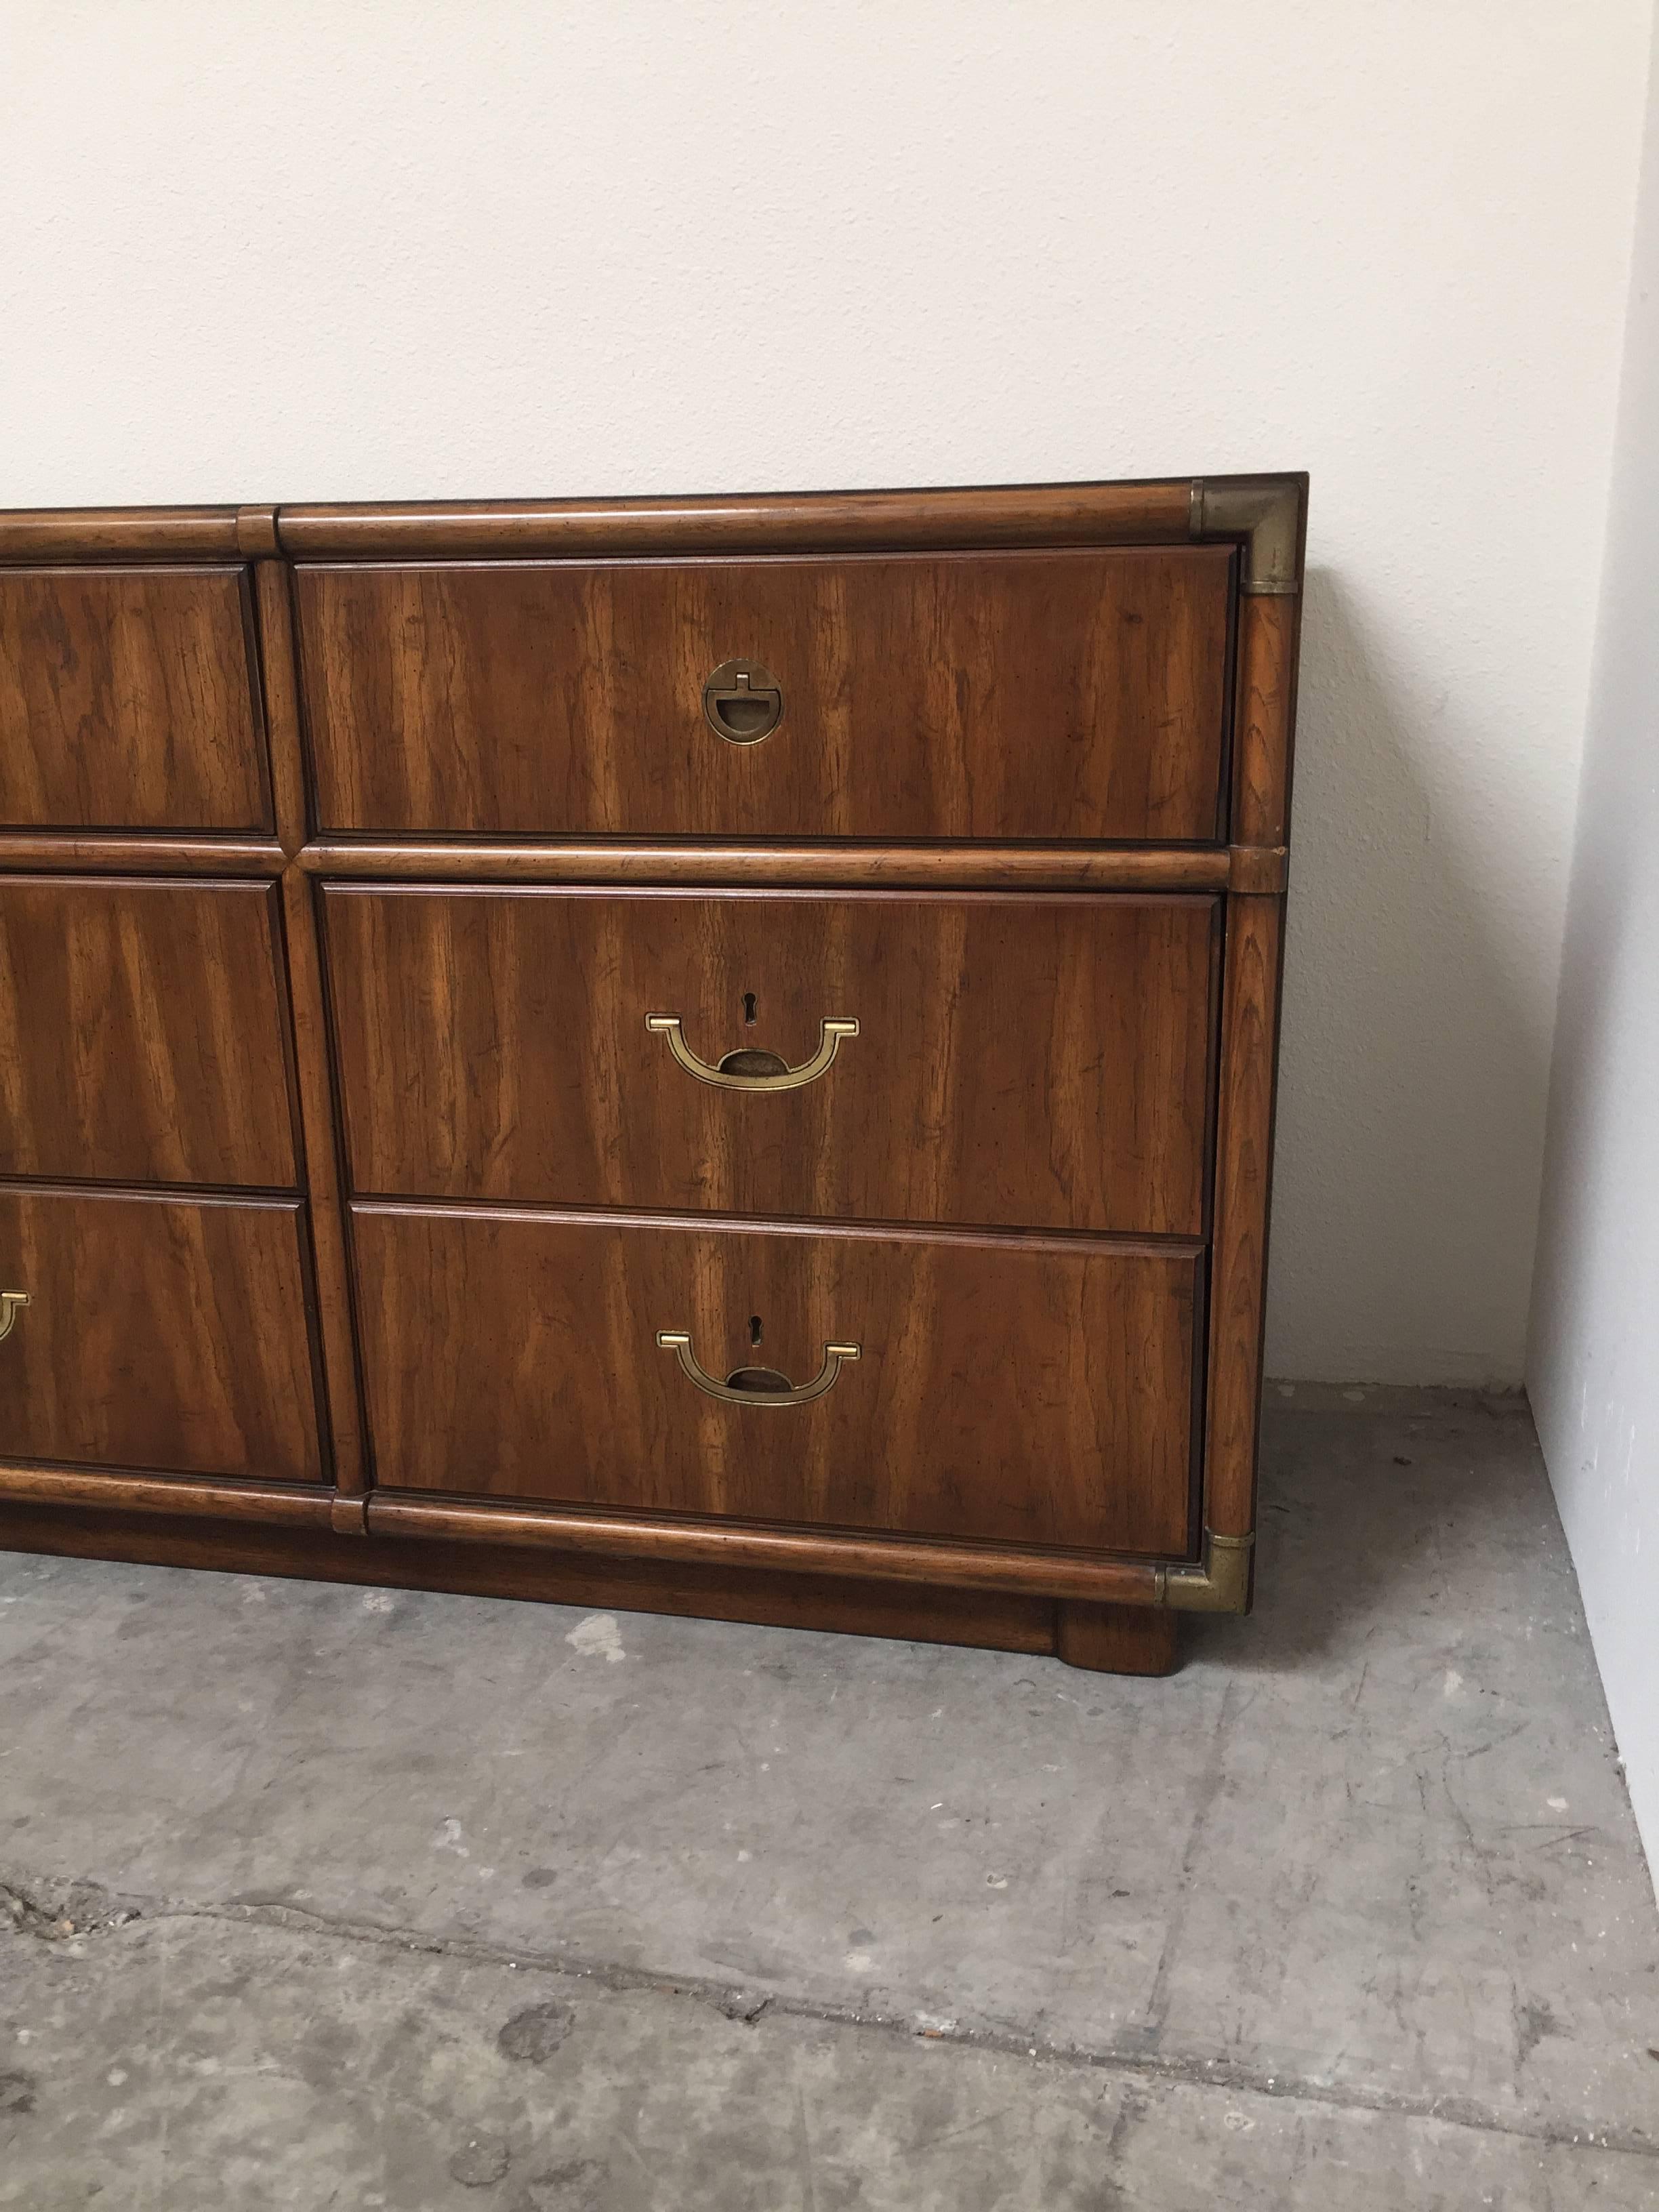 Walnut Campaign style dresser by Drexel. This 1970s piece boasts all original brass hardware with nine drawers. Outstanding vintage condition.